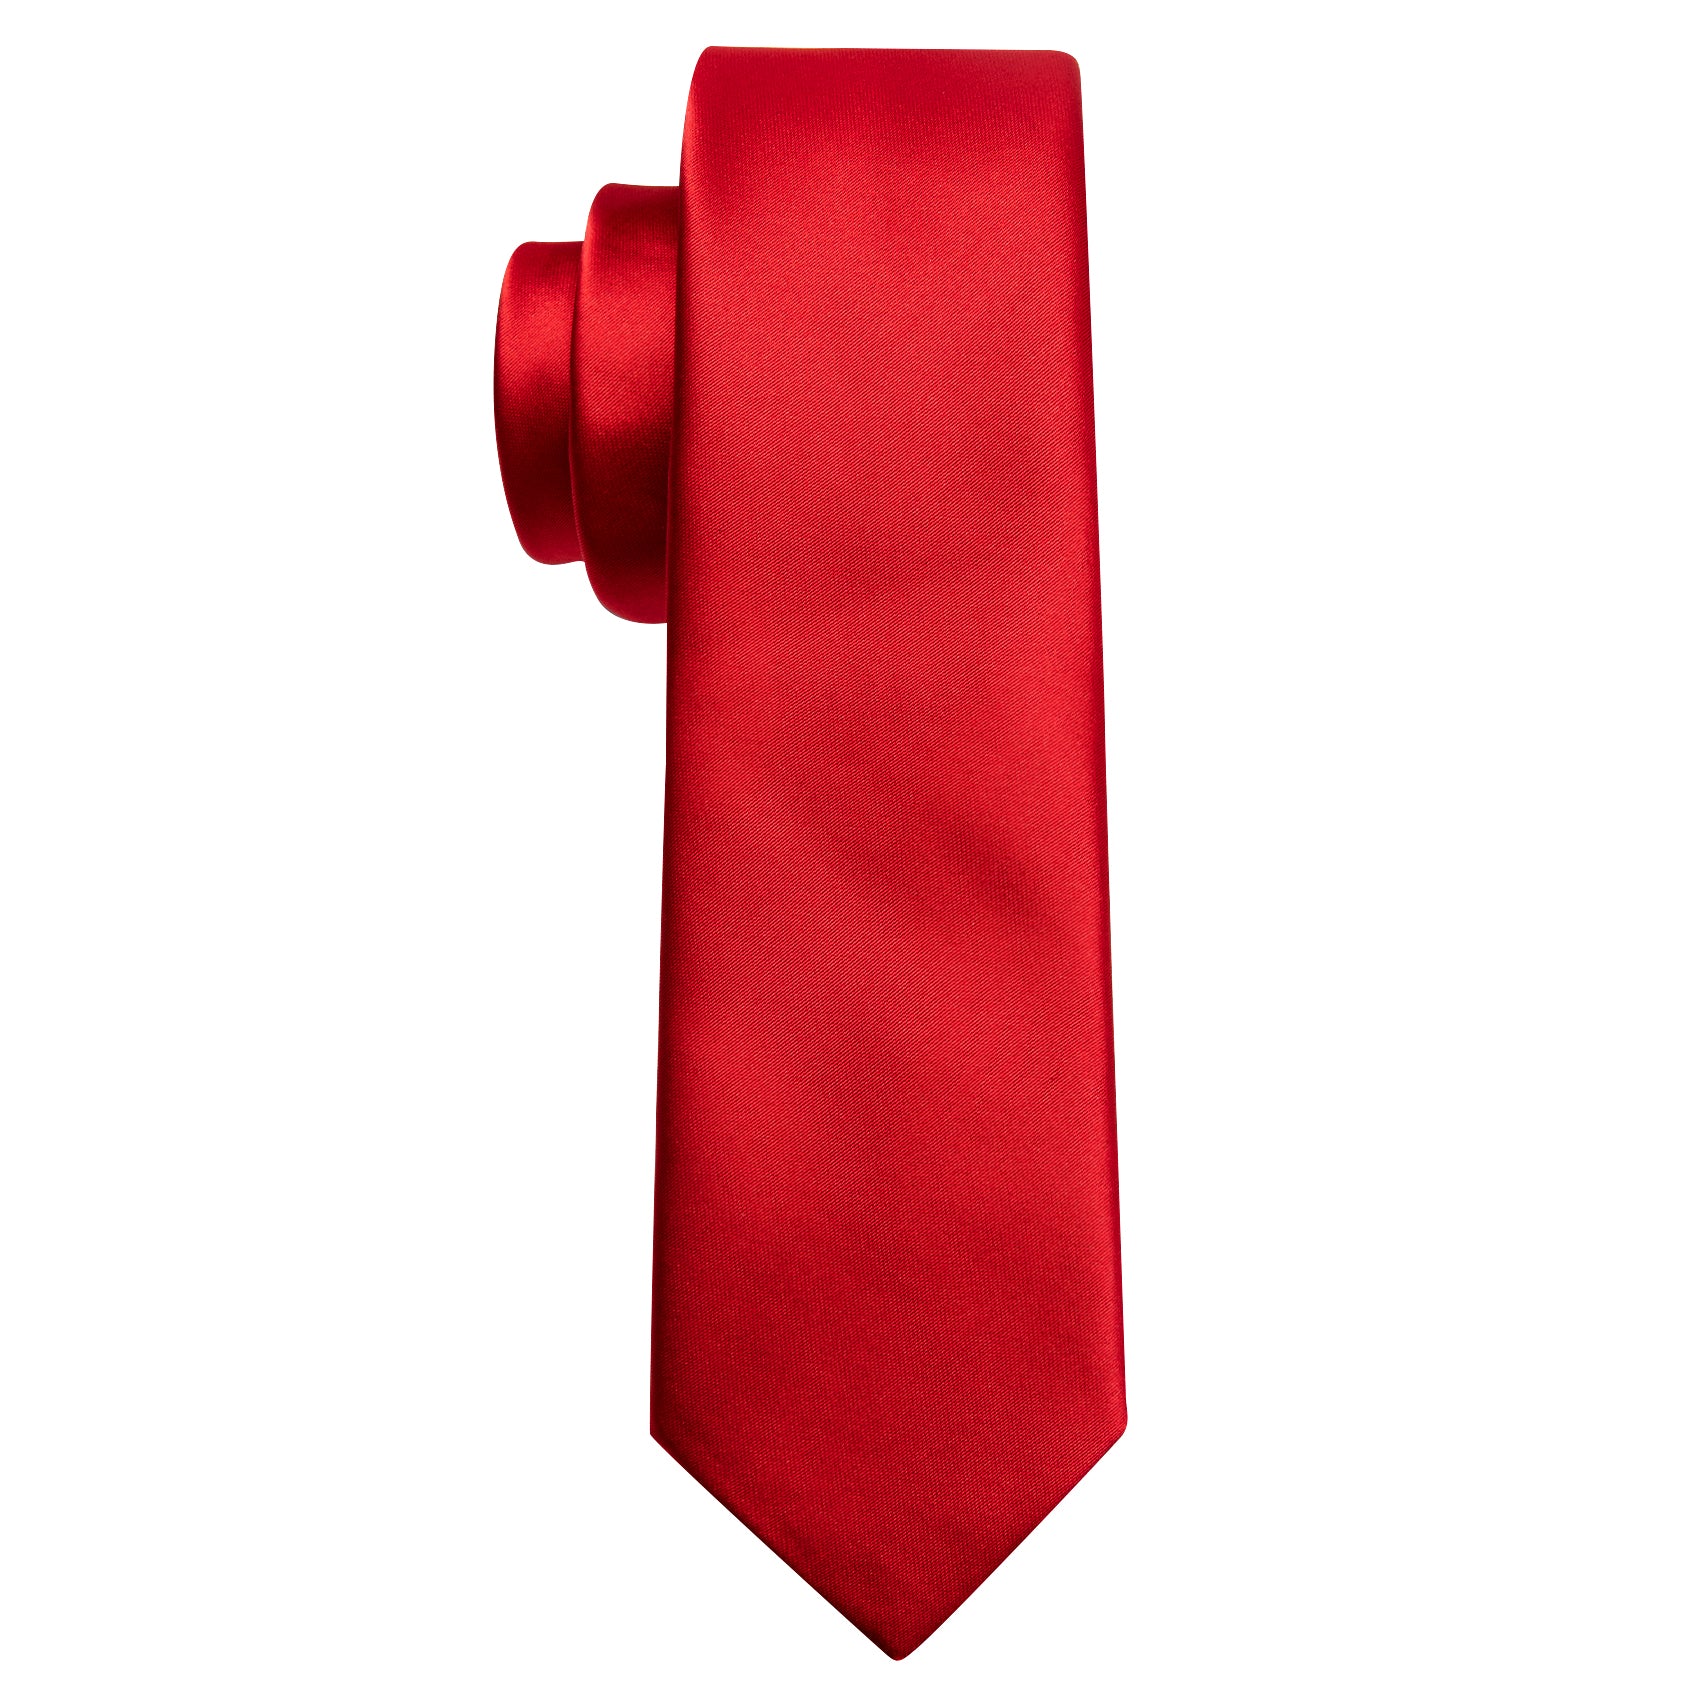 Strong Red Solid Tie Pocket Square Set For Kids